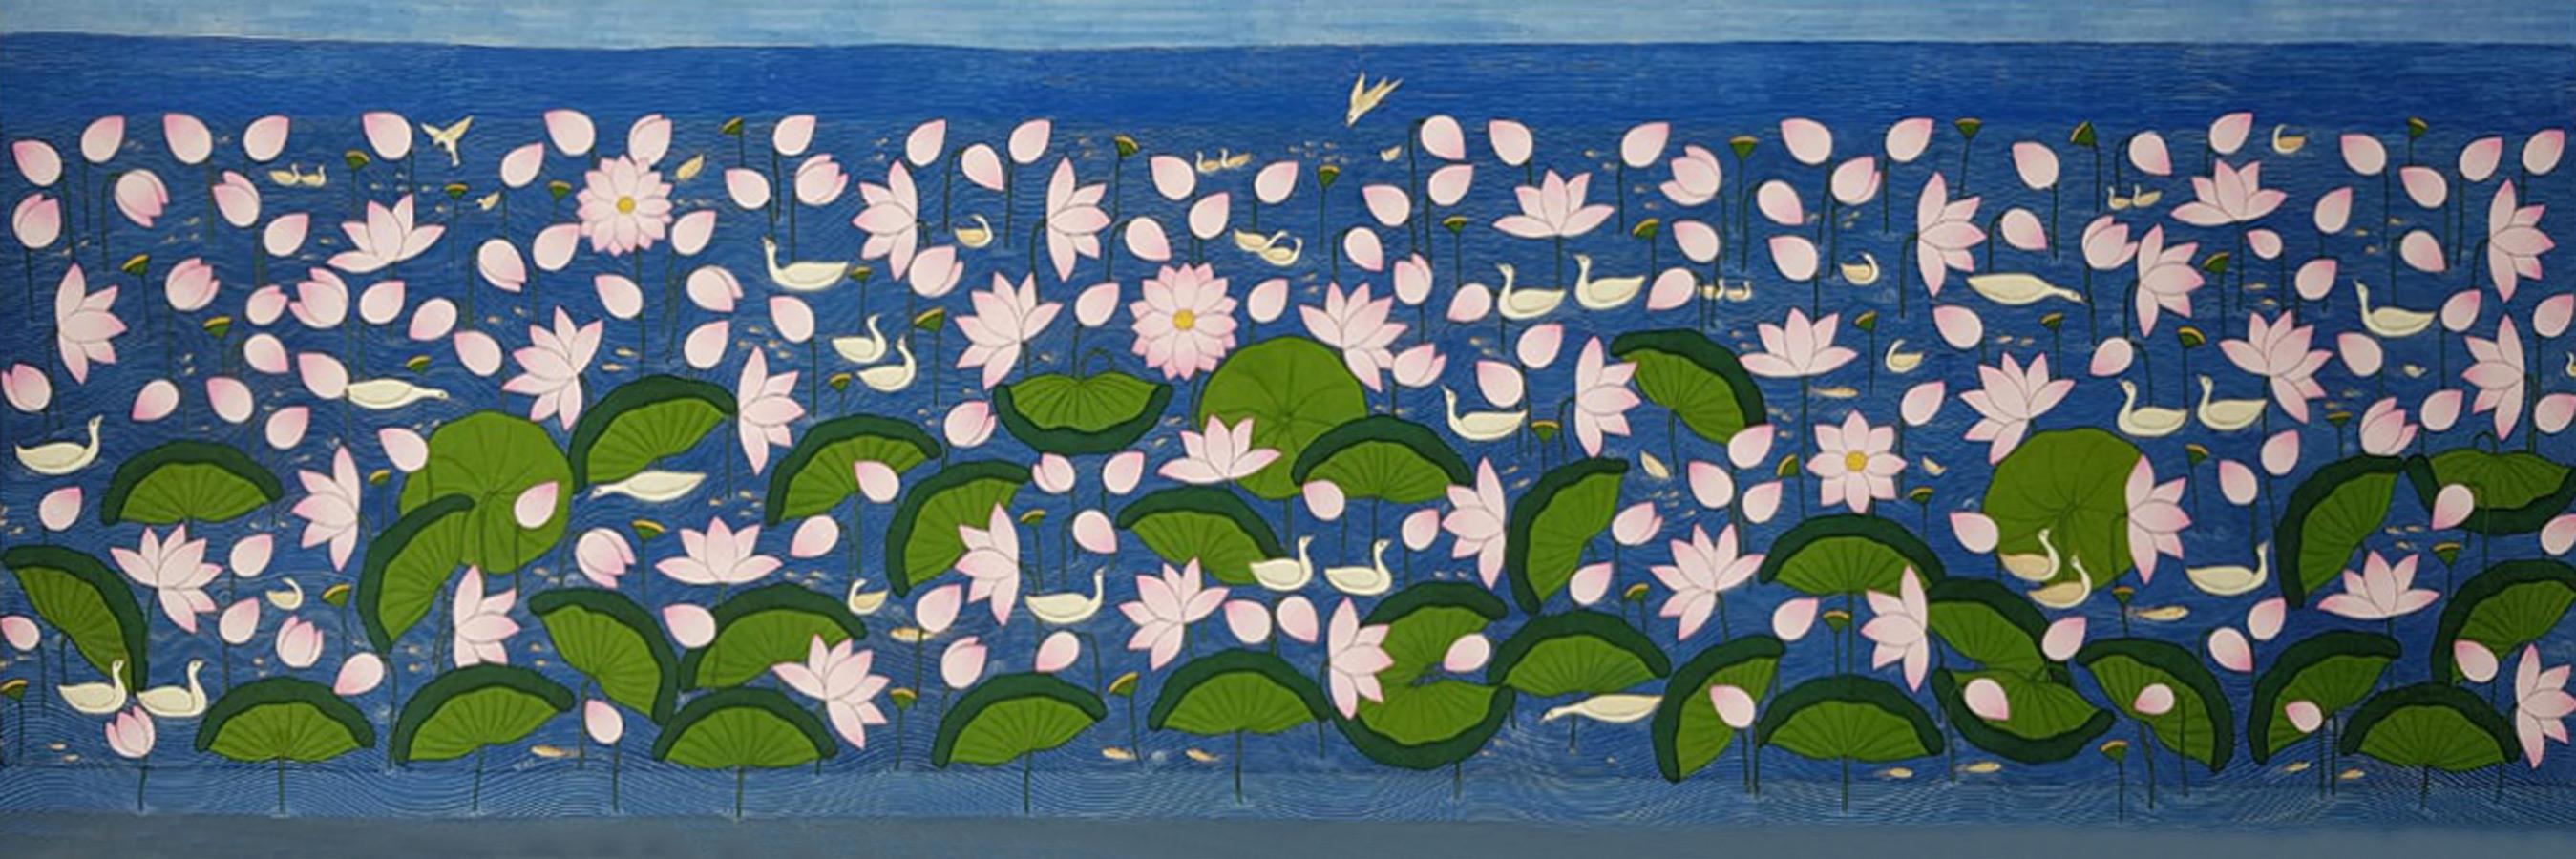 Yugal Kishor Sharma Interior Painting - Lotus Pond, Wash on Cloth, Pink, Blue, Green by Indian Artist "In Stock"